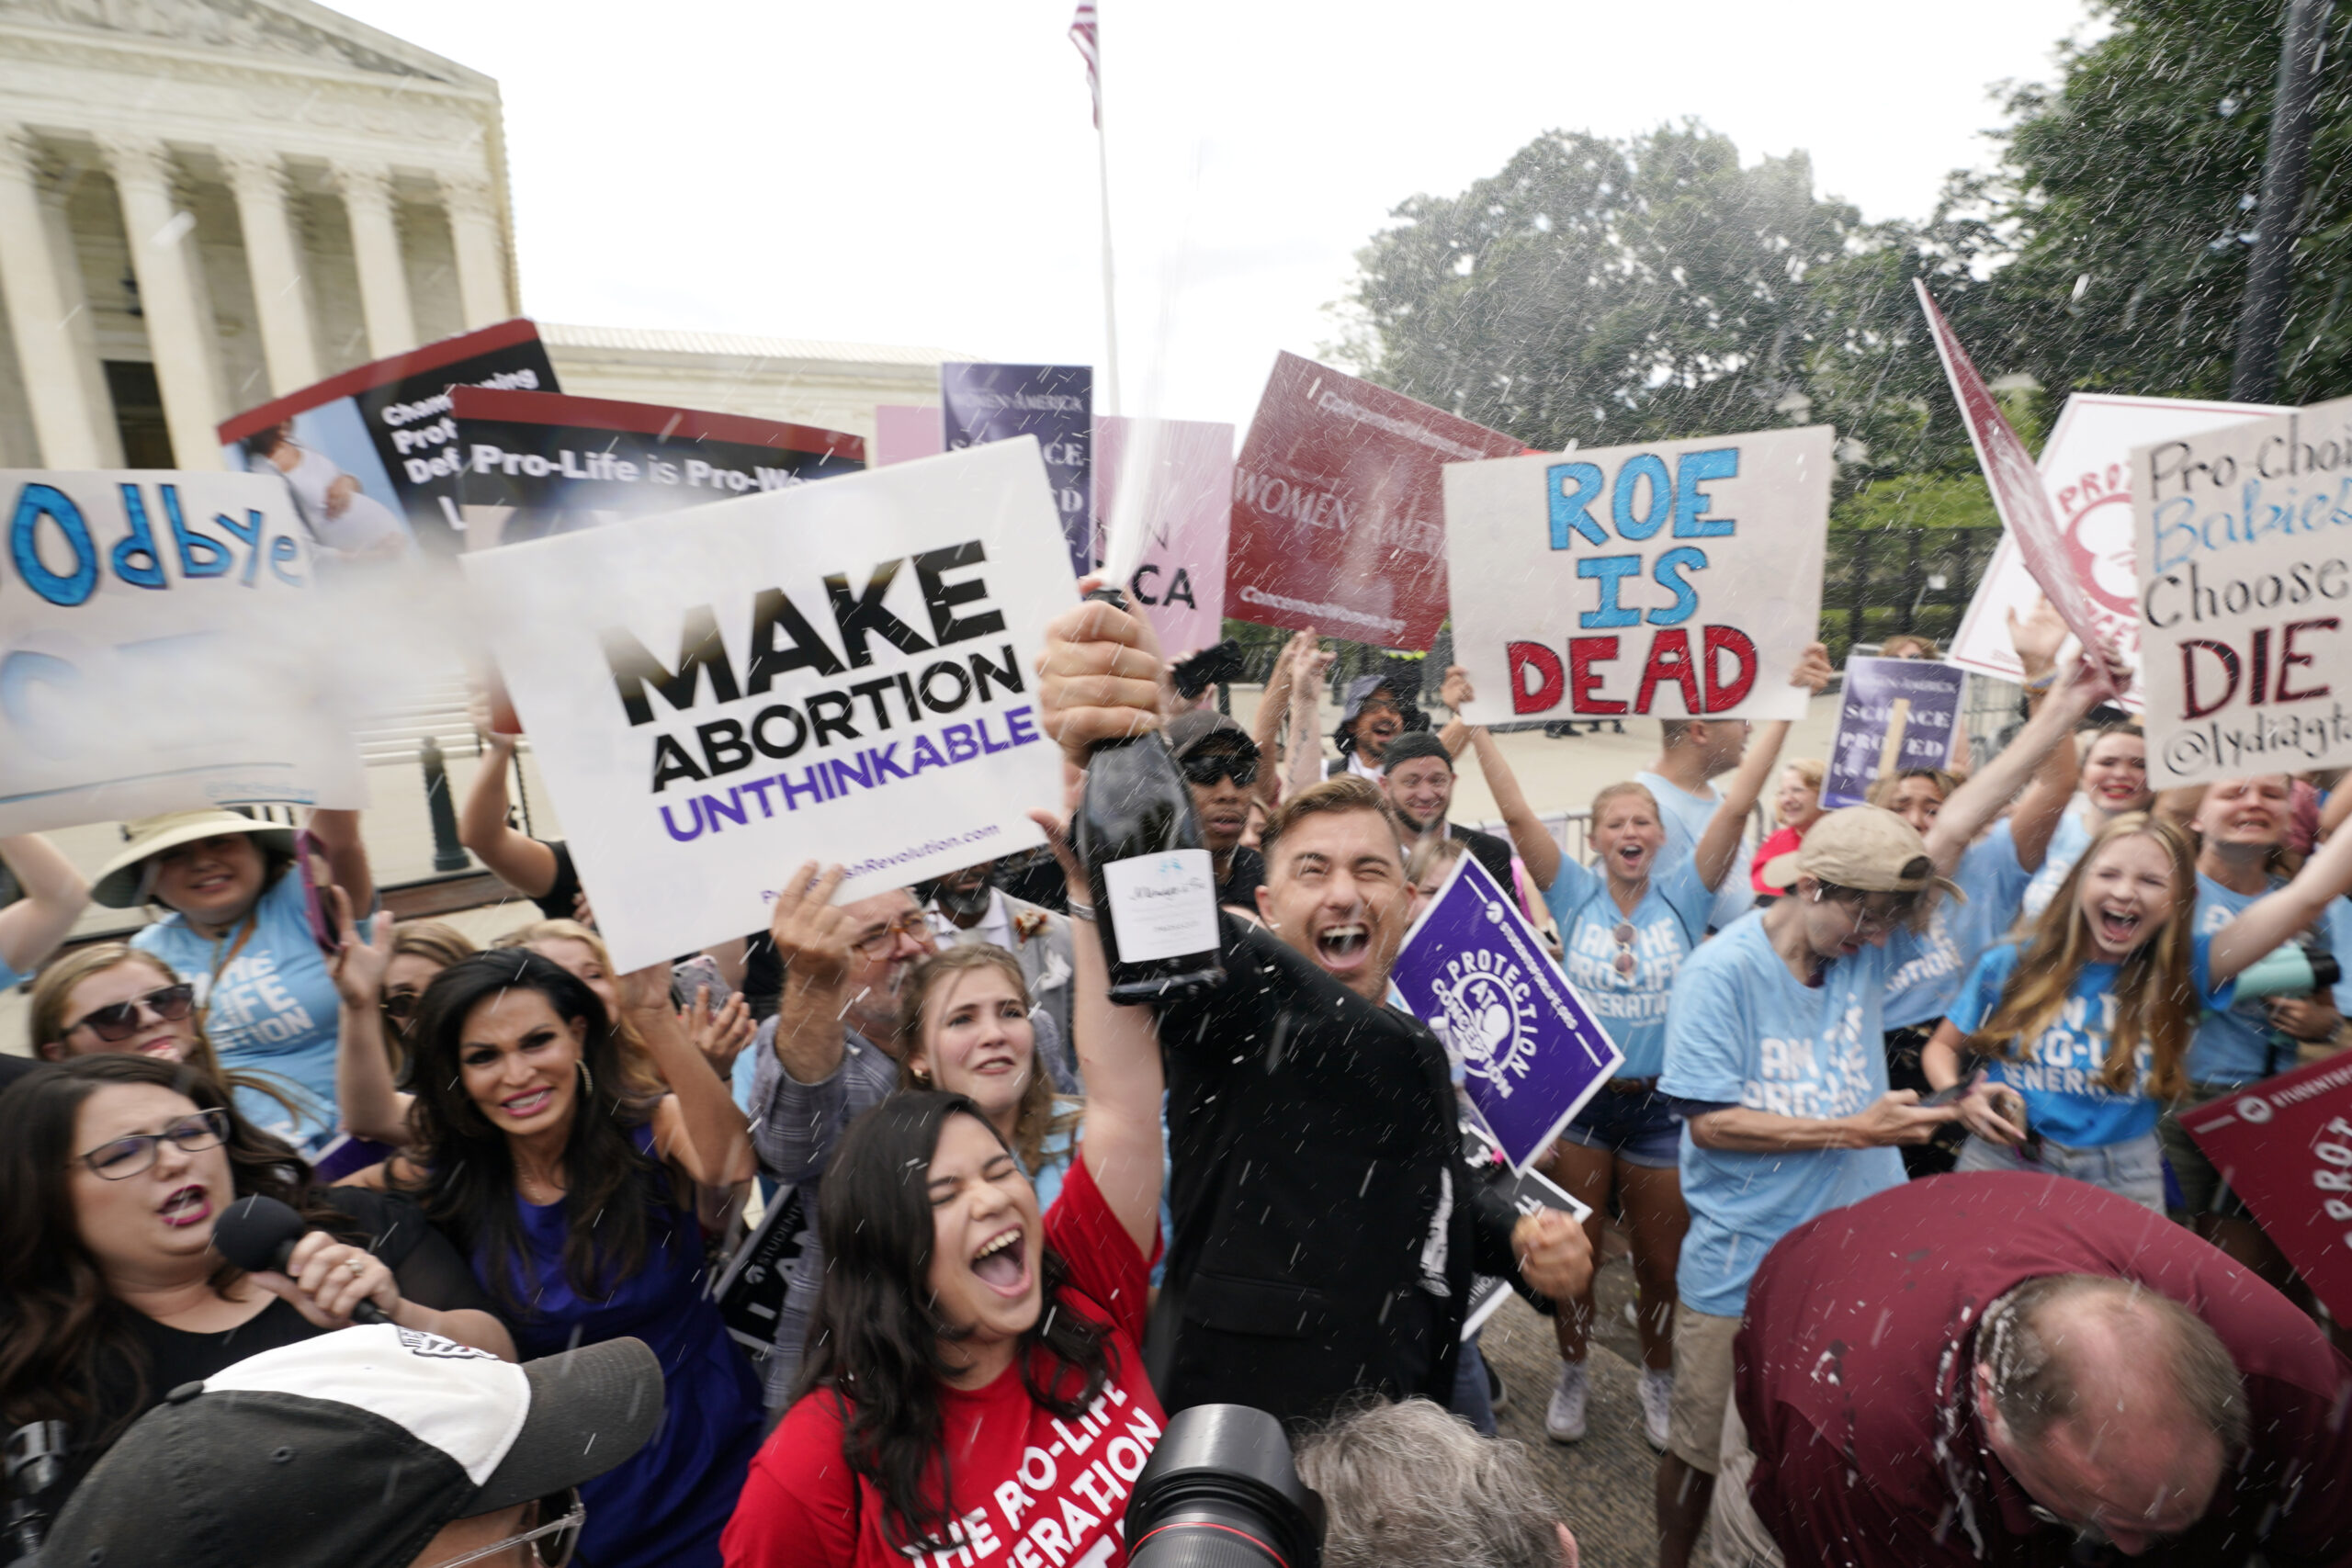 A celebration outside the Supreme Court, Friday, June 24, 2022, in Washington. The Supreme Court has ended constitutional protections for abortion that had been in place nearly 50 years — a decision by its conservative majority to overturn the court's landmark abortion cases. (AP Photo/Steve Helber)